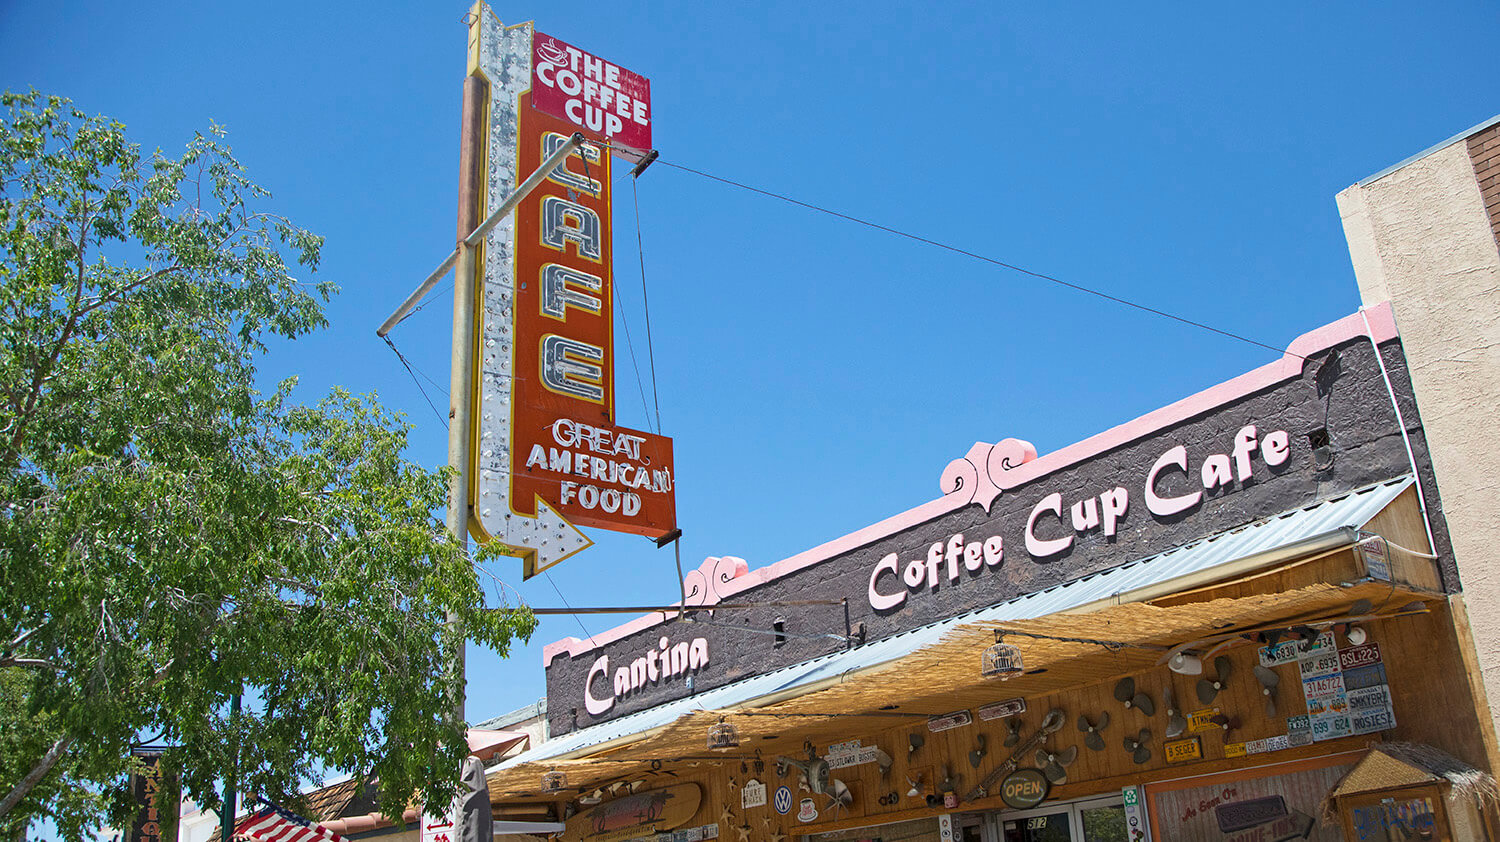 https://travelnevada.com/food-drink/coffee-cup-cafe/